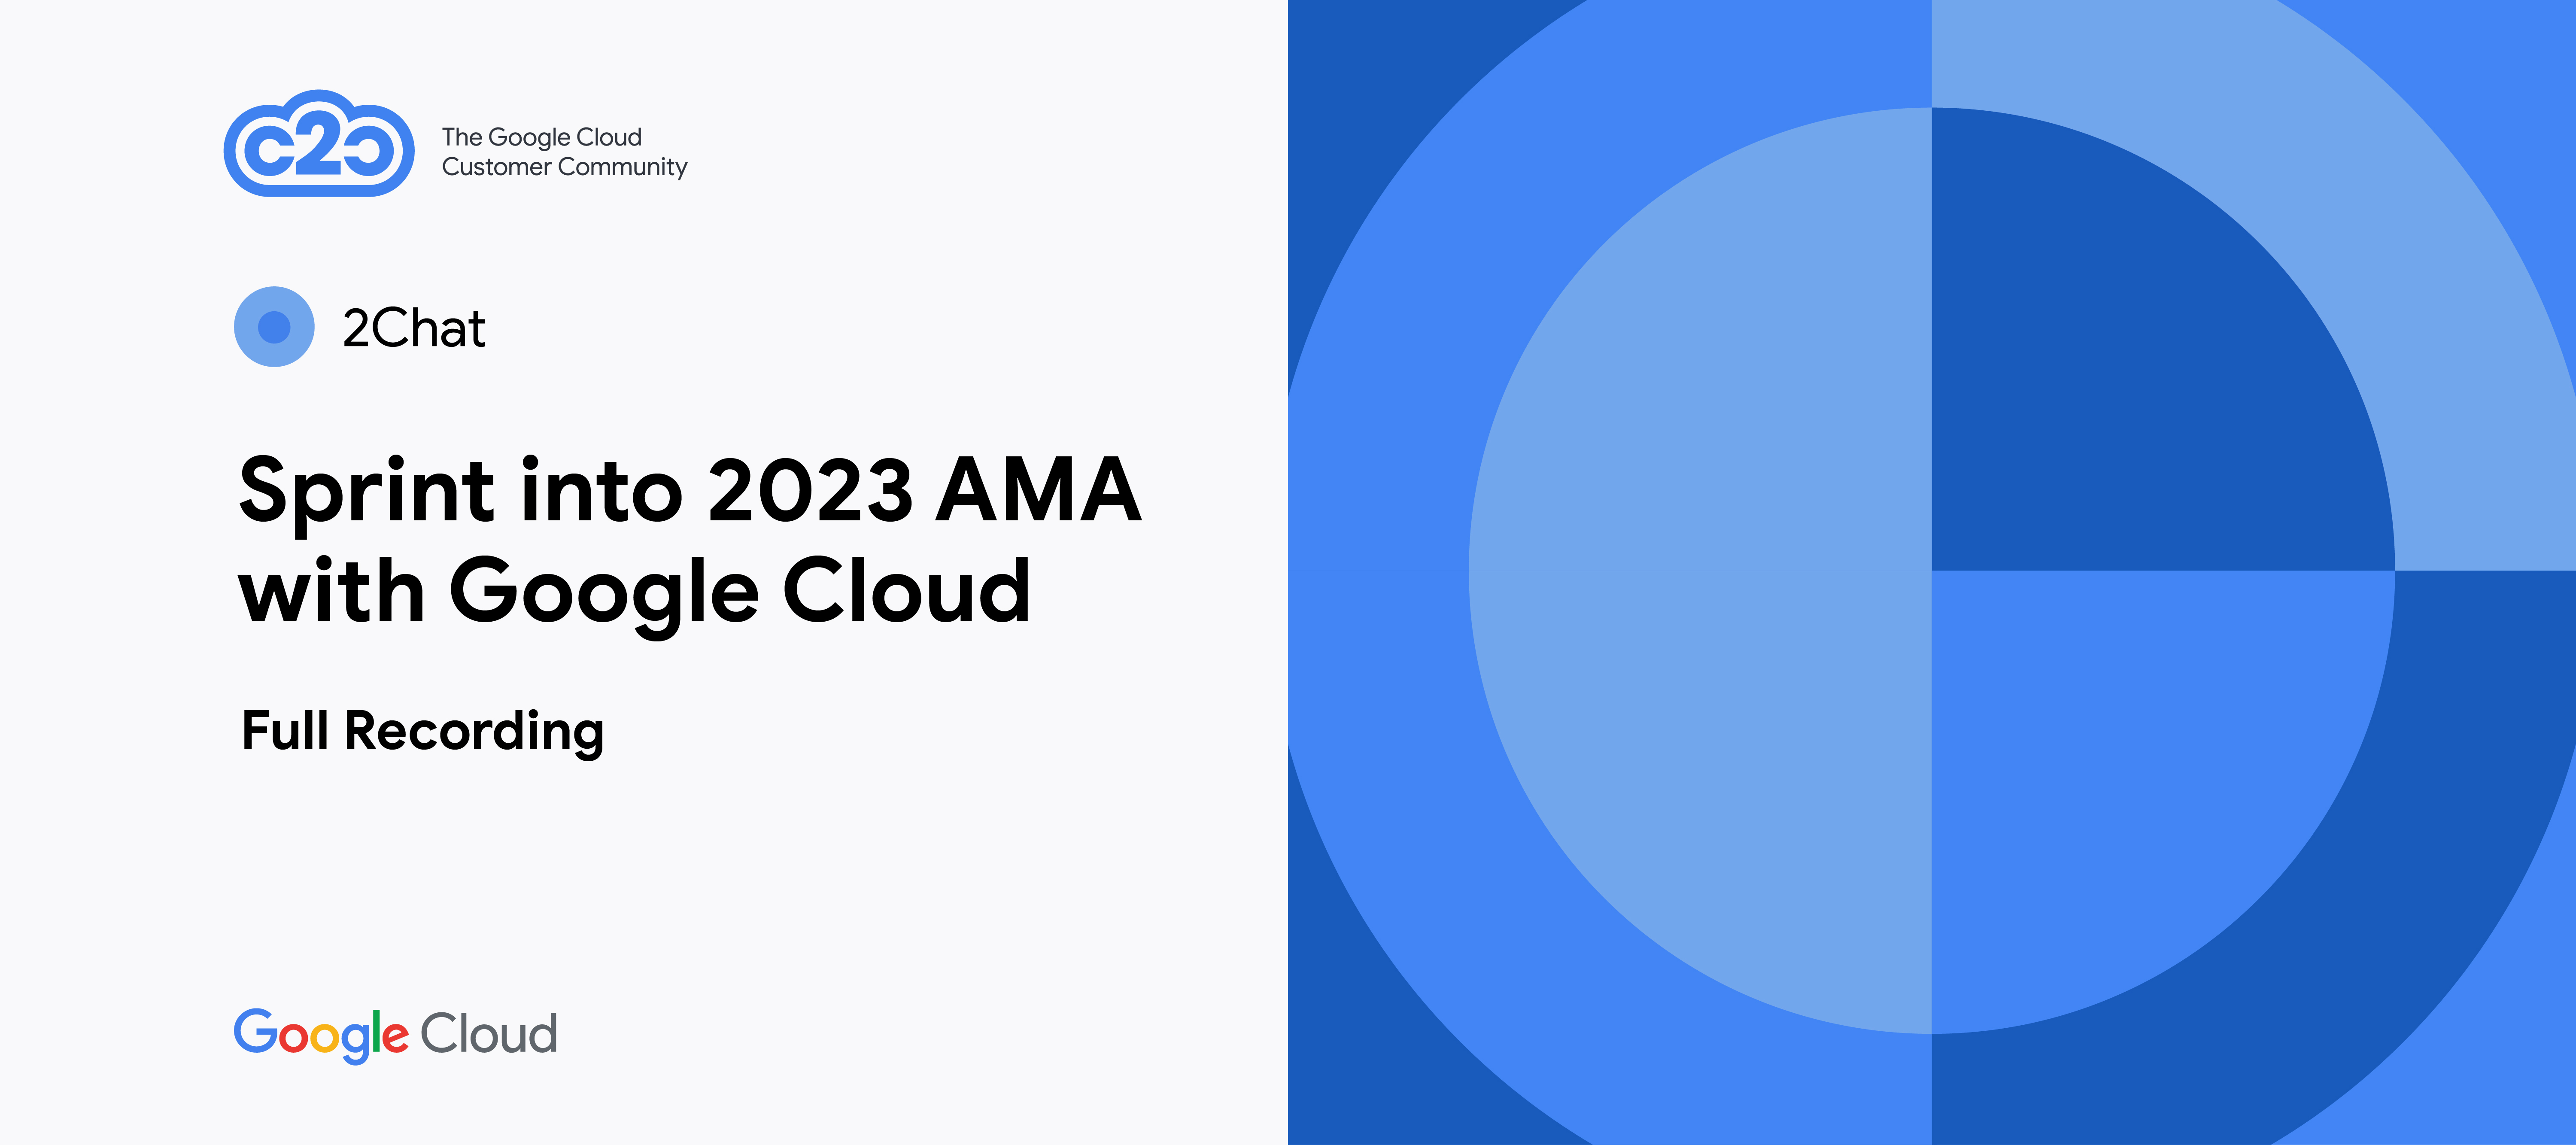 Sprint into 2023 AMA with Google Cloud (full recording)